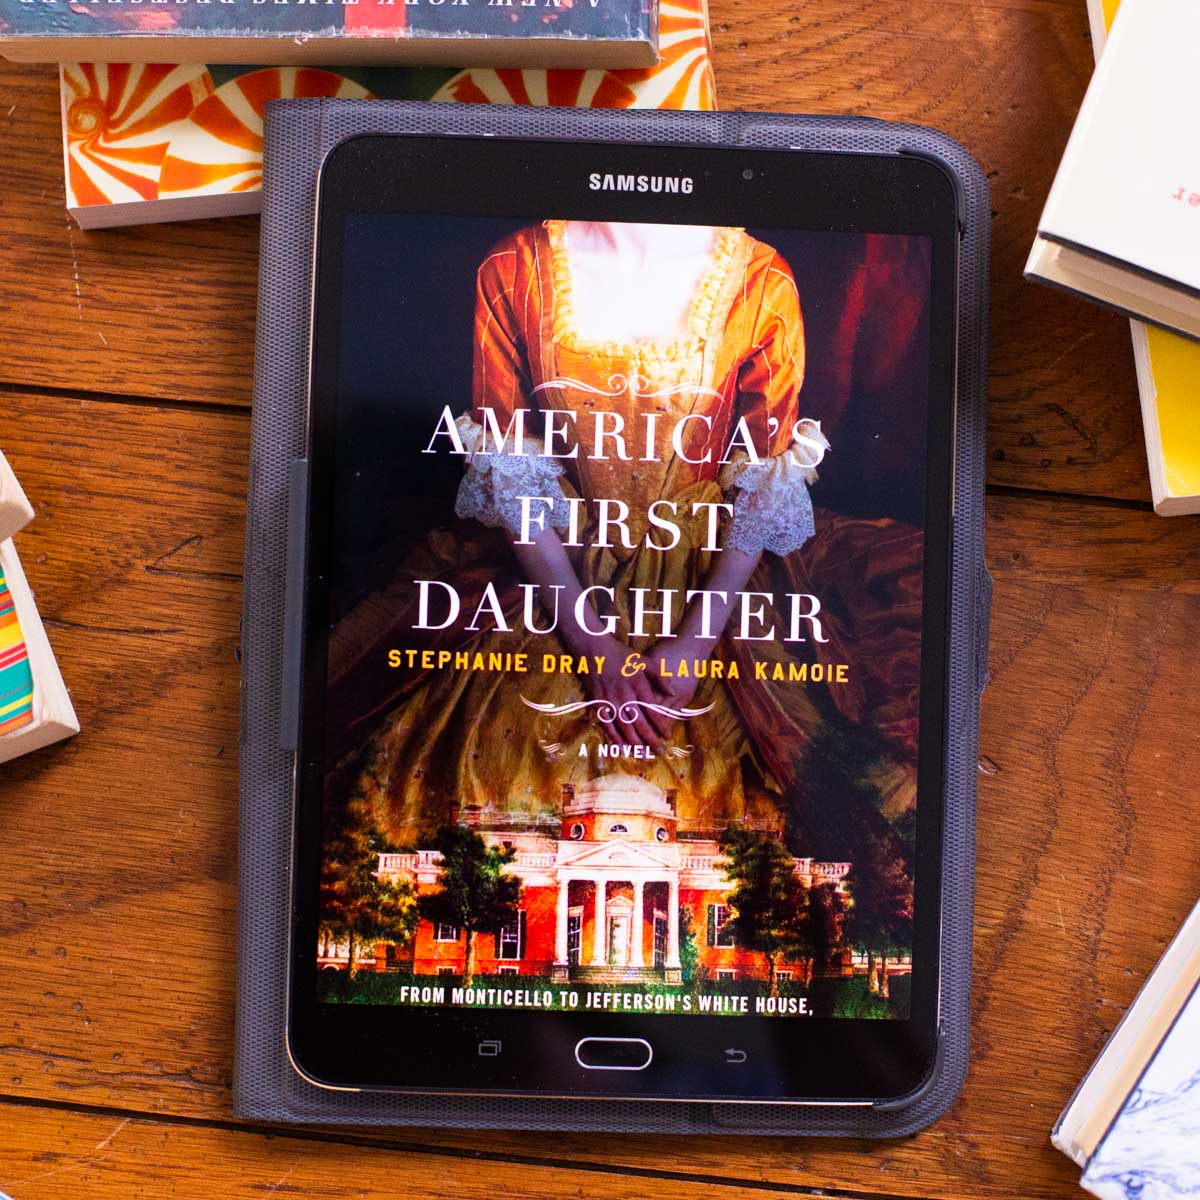 A reading tablet has the cover of America's First Daughter on the screen.